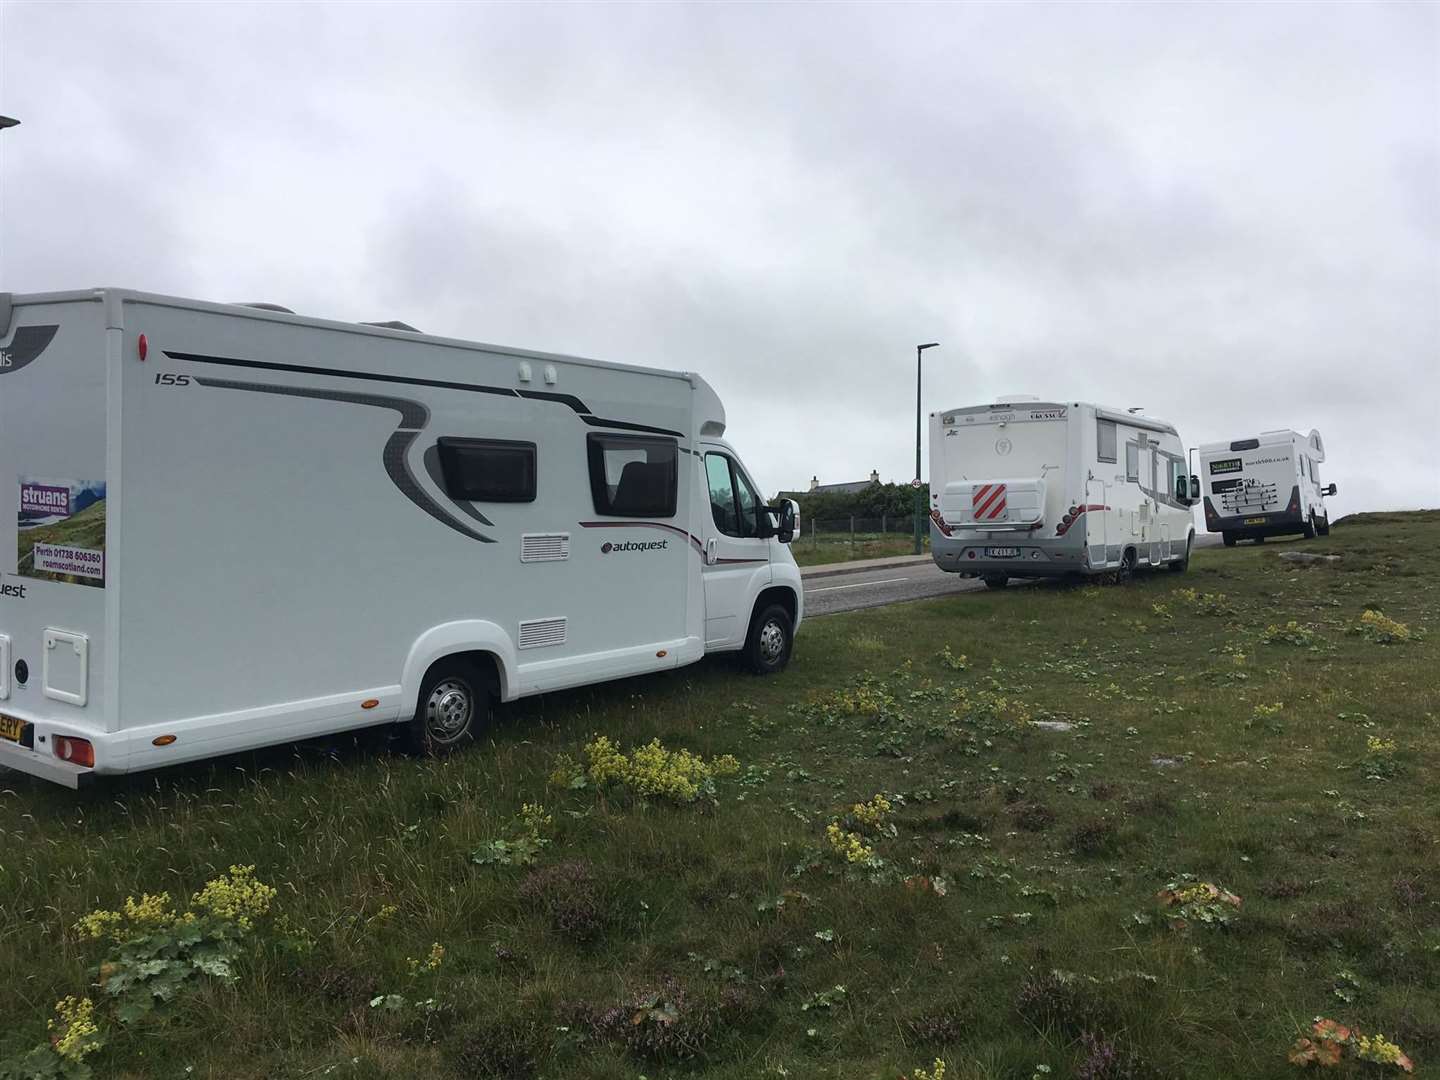 Motorhomes parked up on verges near Durness.